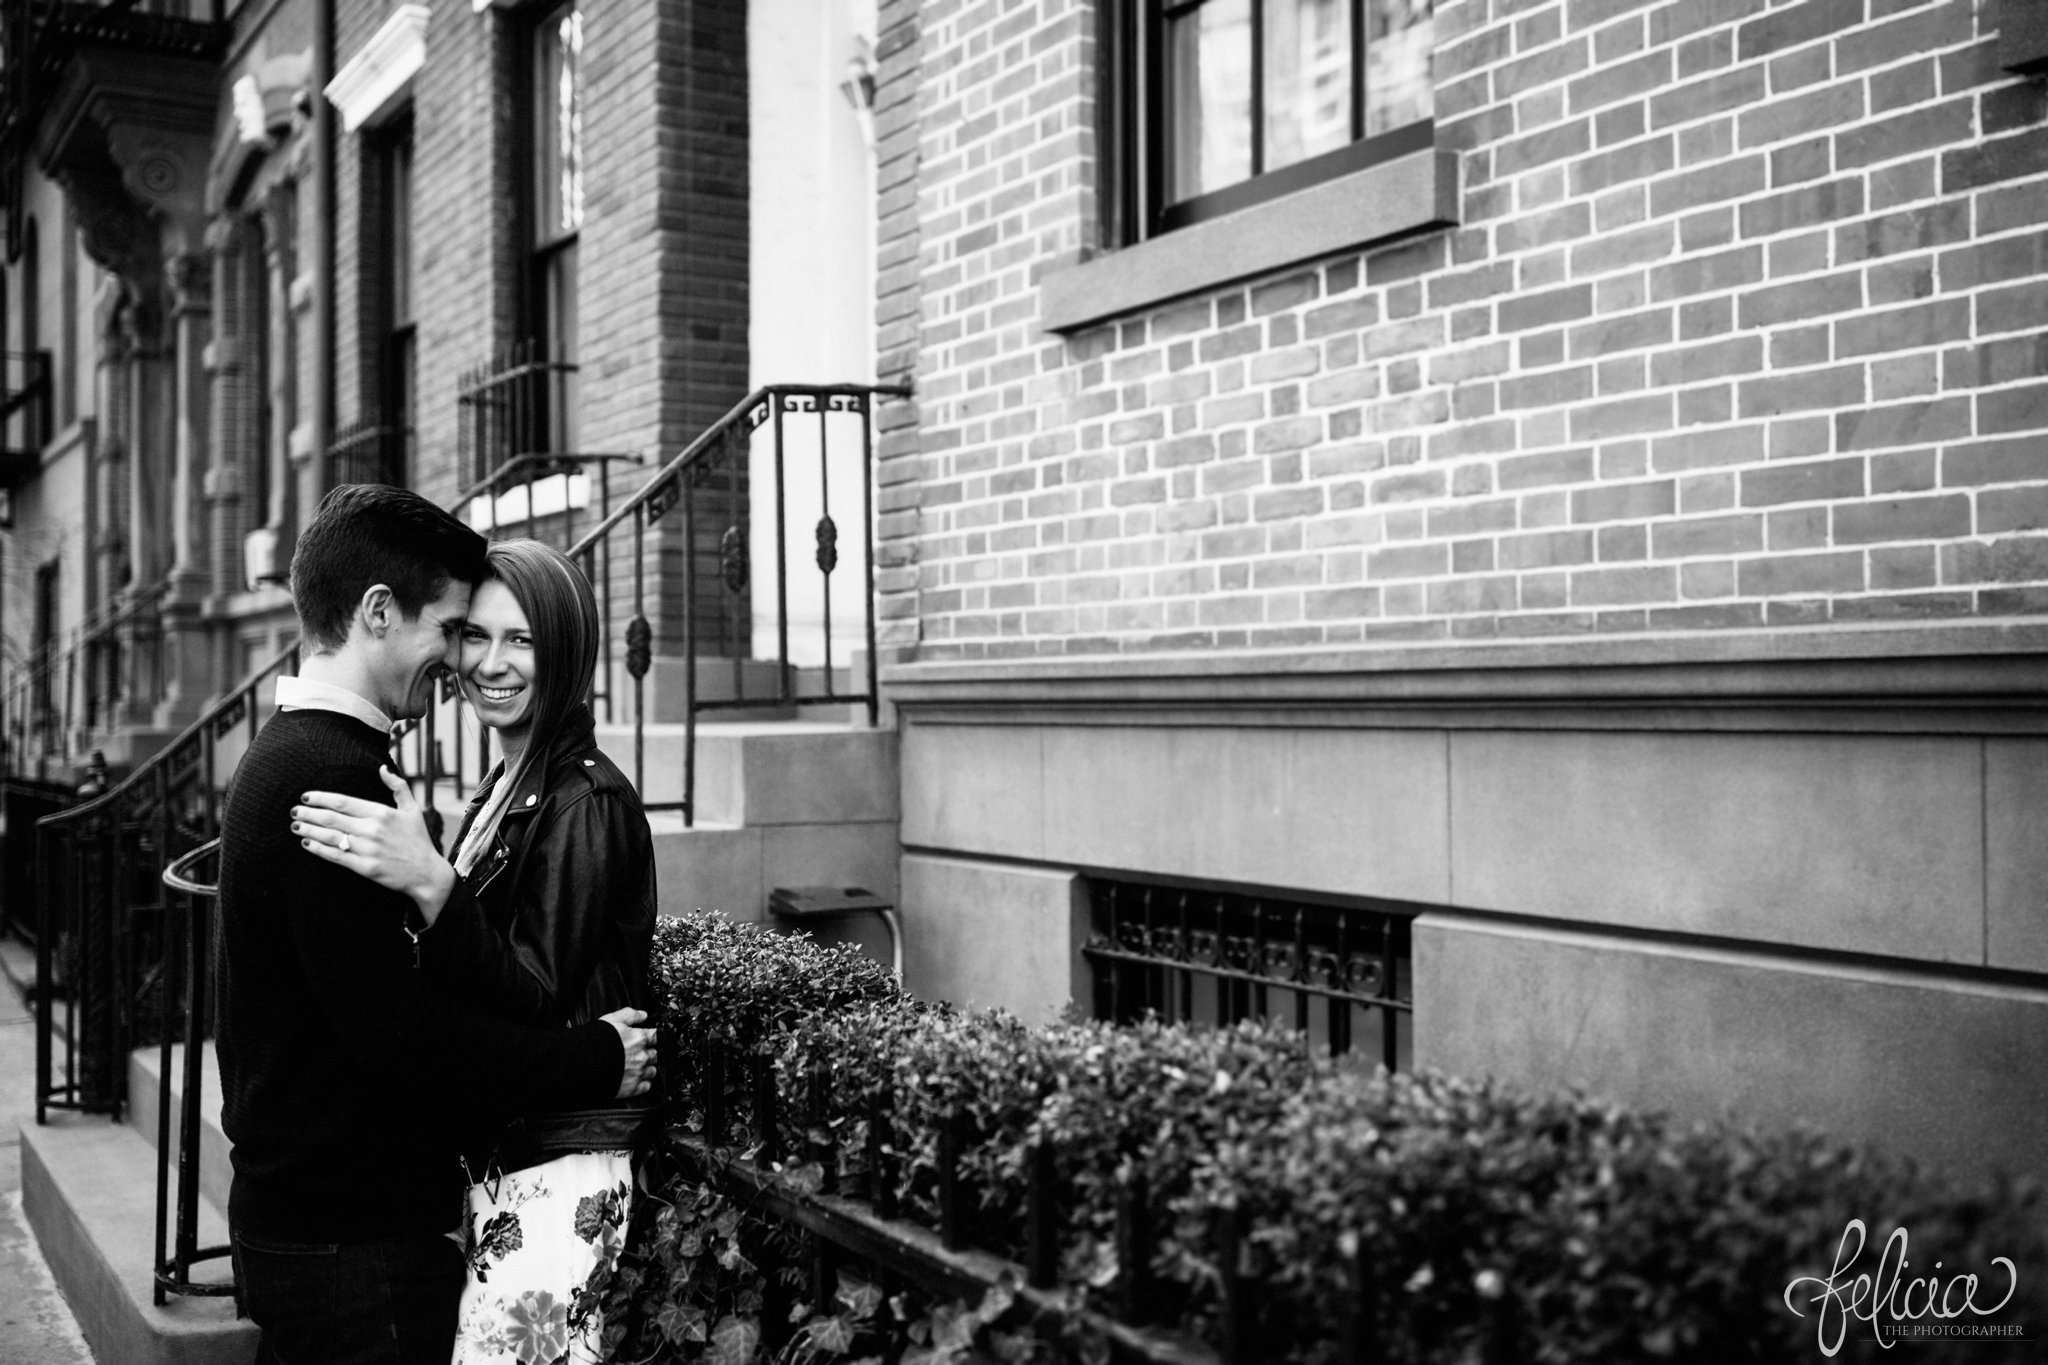 wedding | New York City | West Village | New York City photography | wedding photography | images by feliciathephotographer.com | engagement photos | engagement pictures in New York City | candid | romantic engagement pictures | black and white | brick background | engagement ring | bride looking at camera | groom looking at bride 